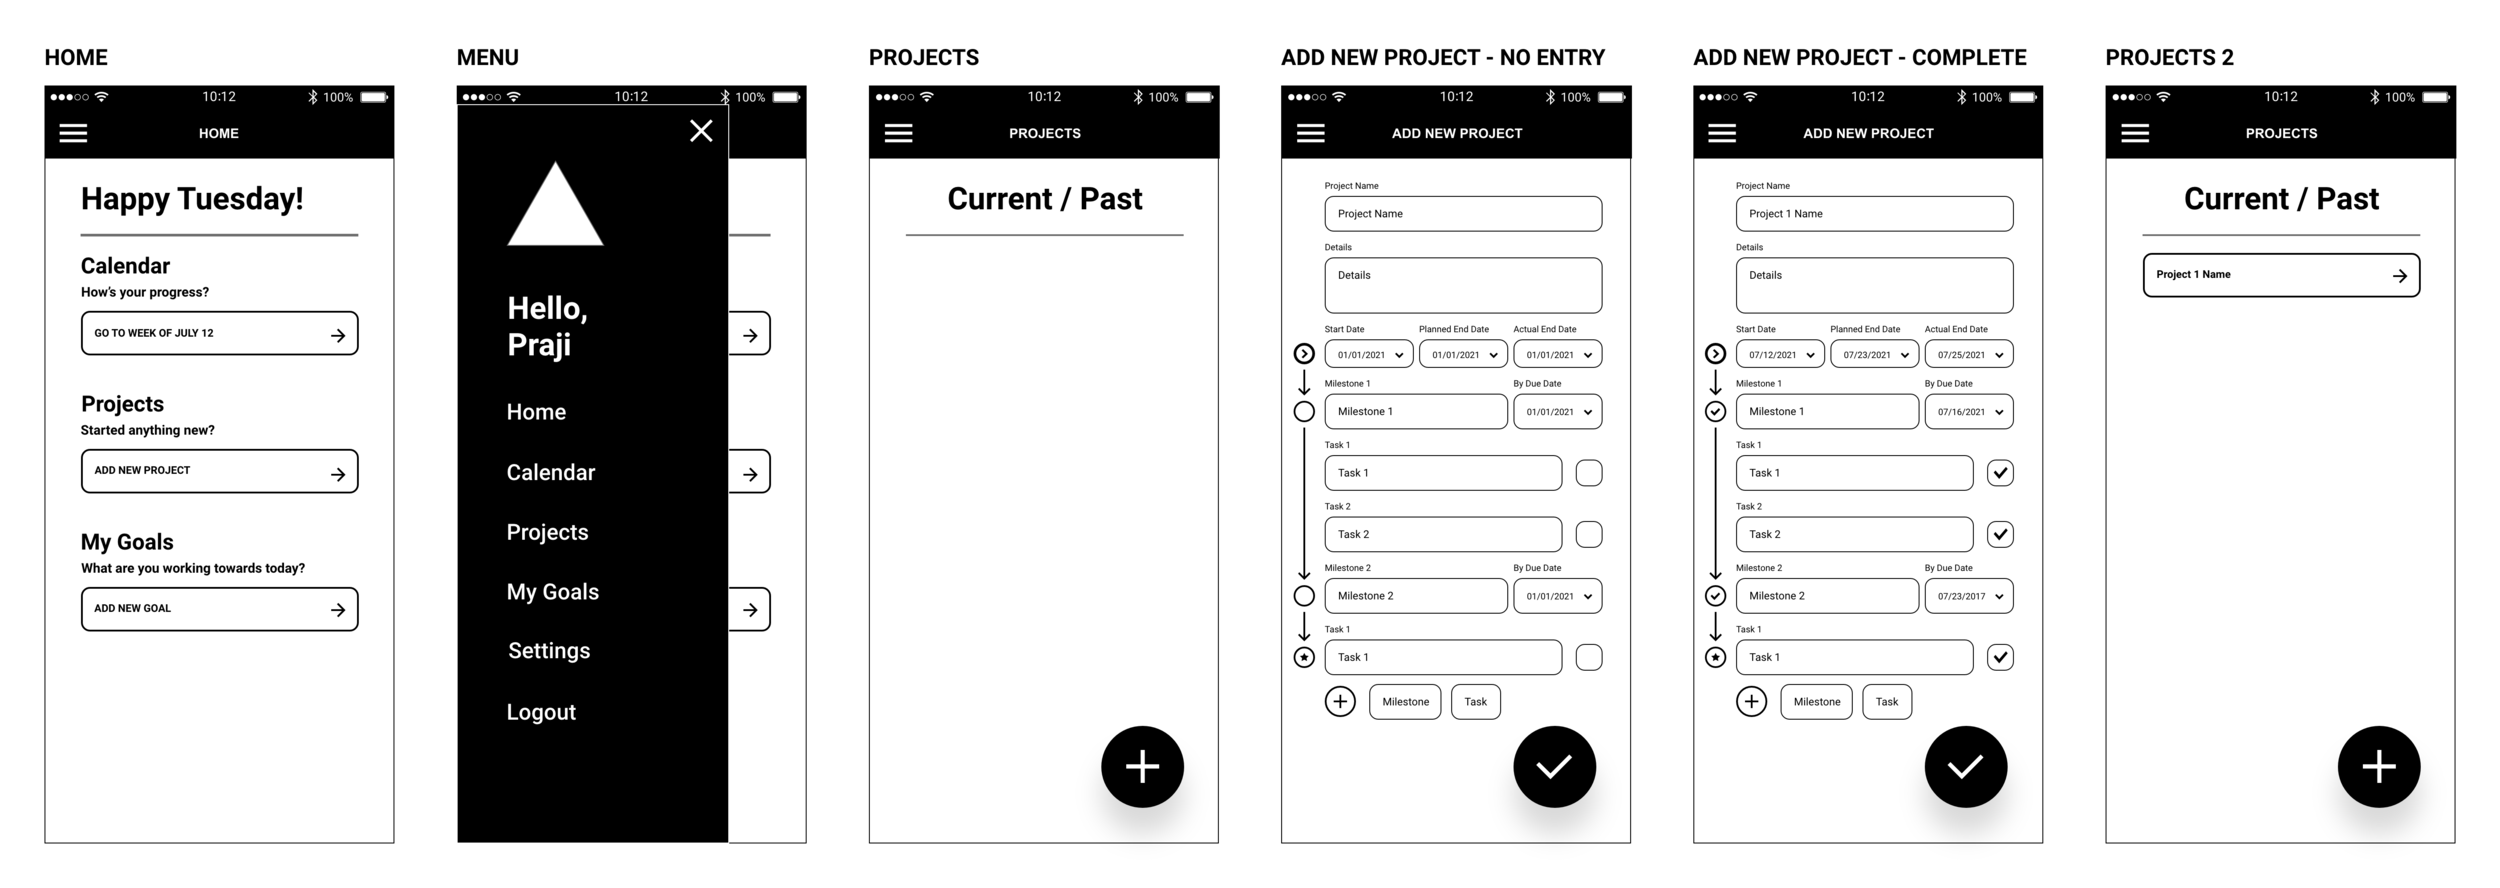 WIREFRAMES - Red Route 2 - New User Adding New Project